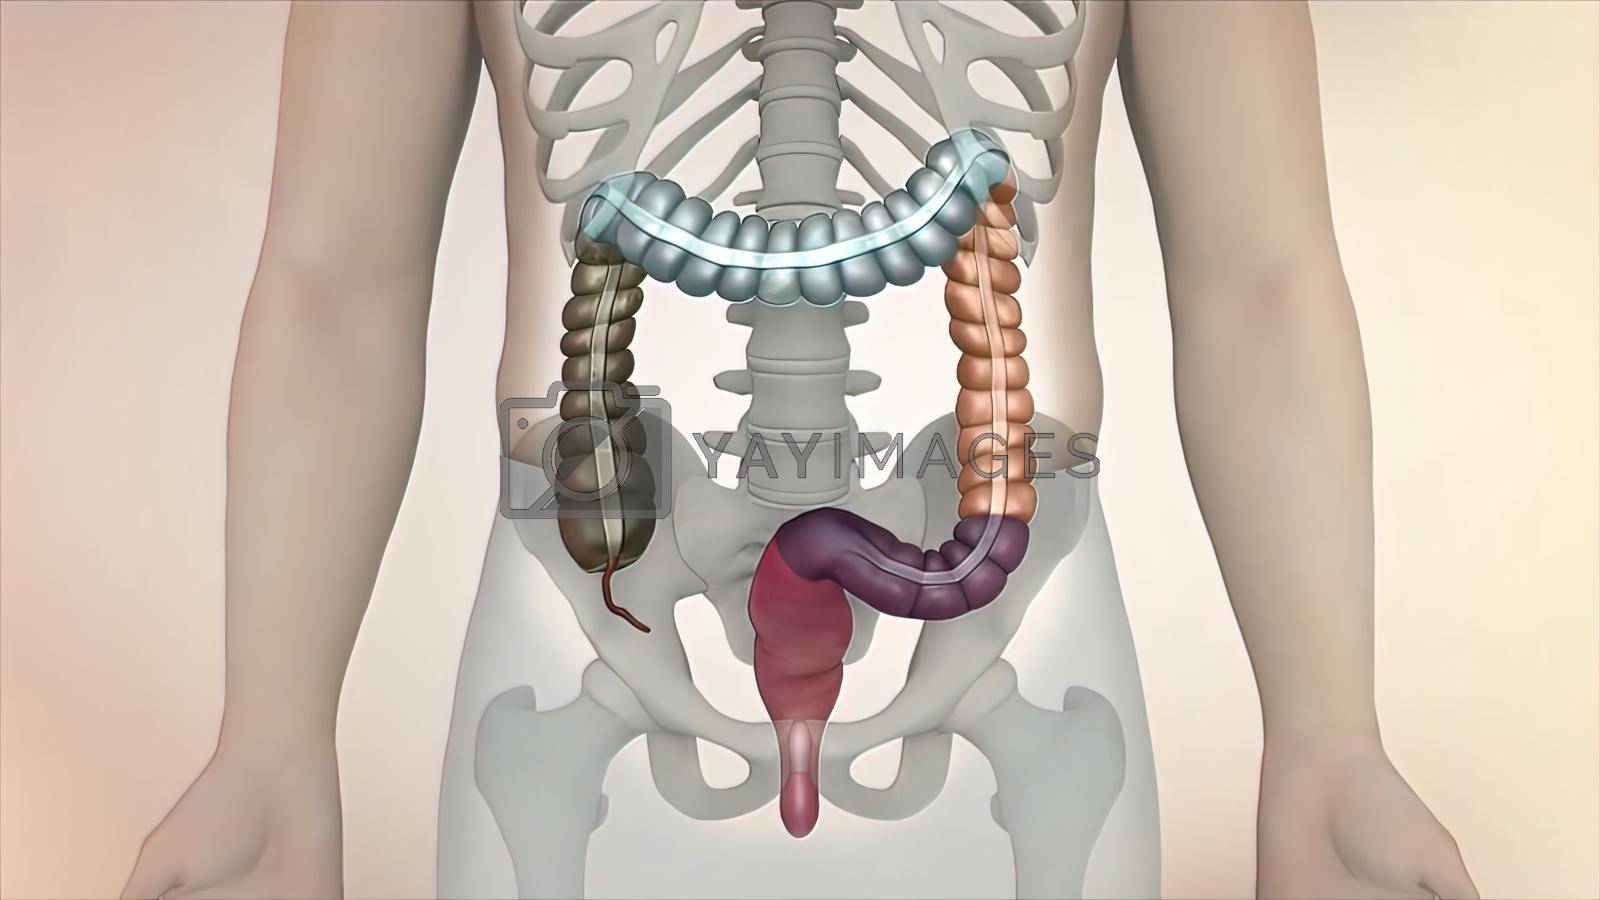 Royalty free image of the course of digestion in the human digestive system. by creativepic